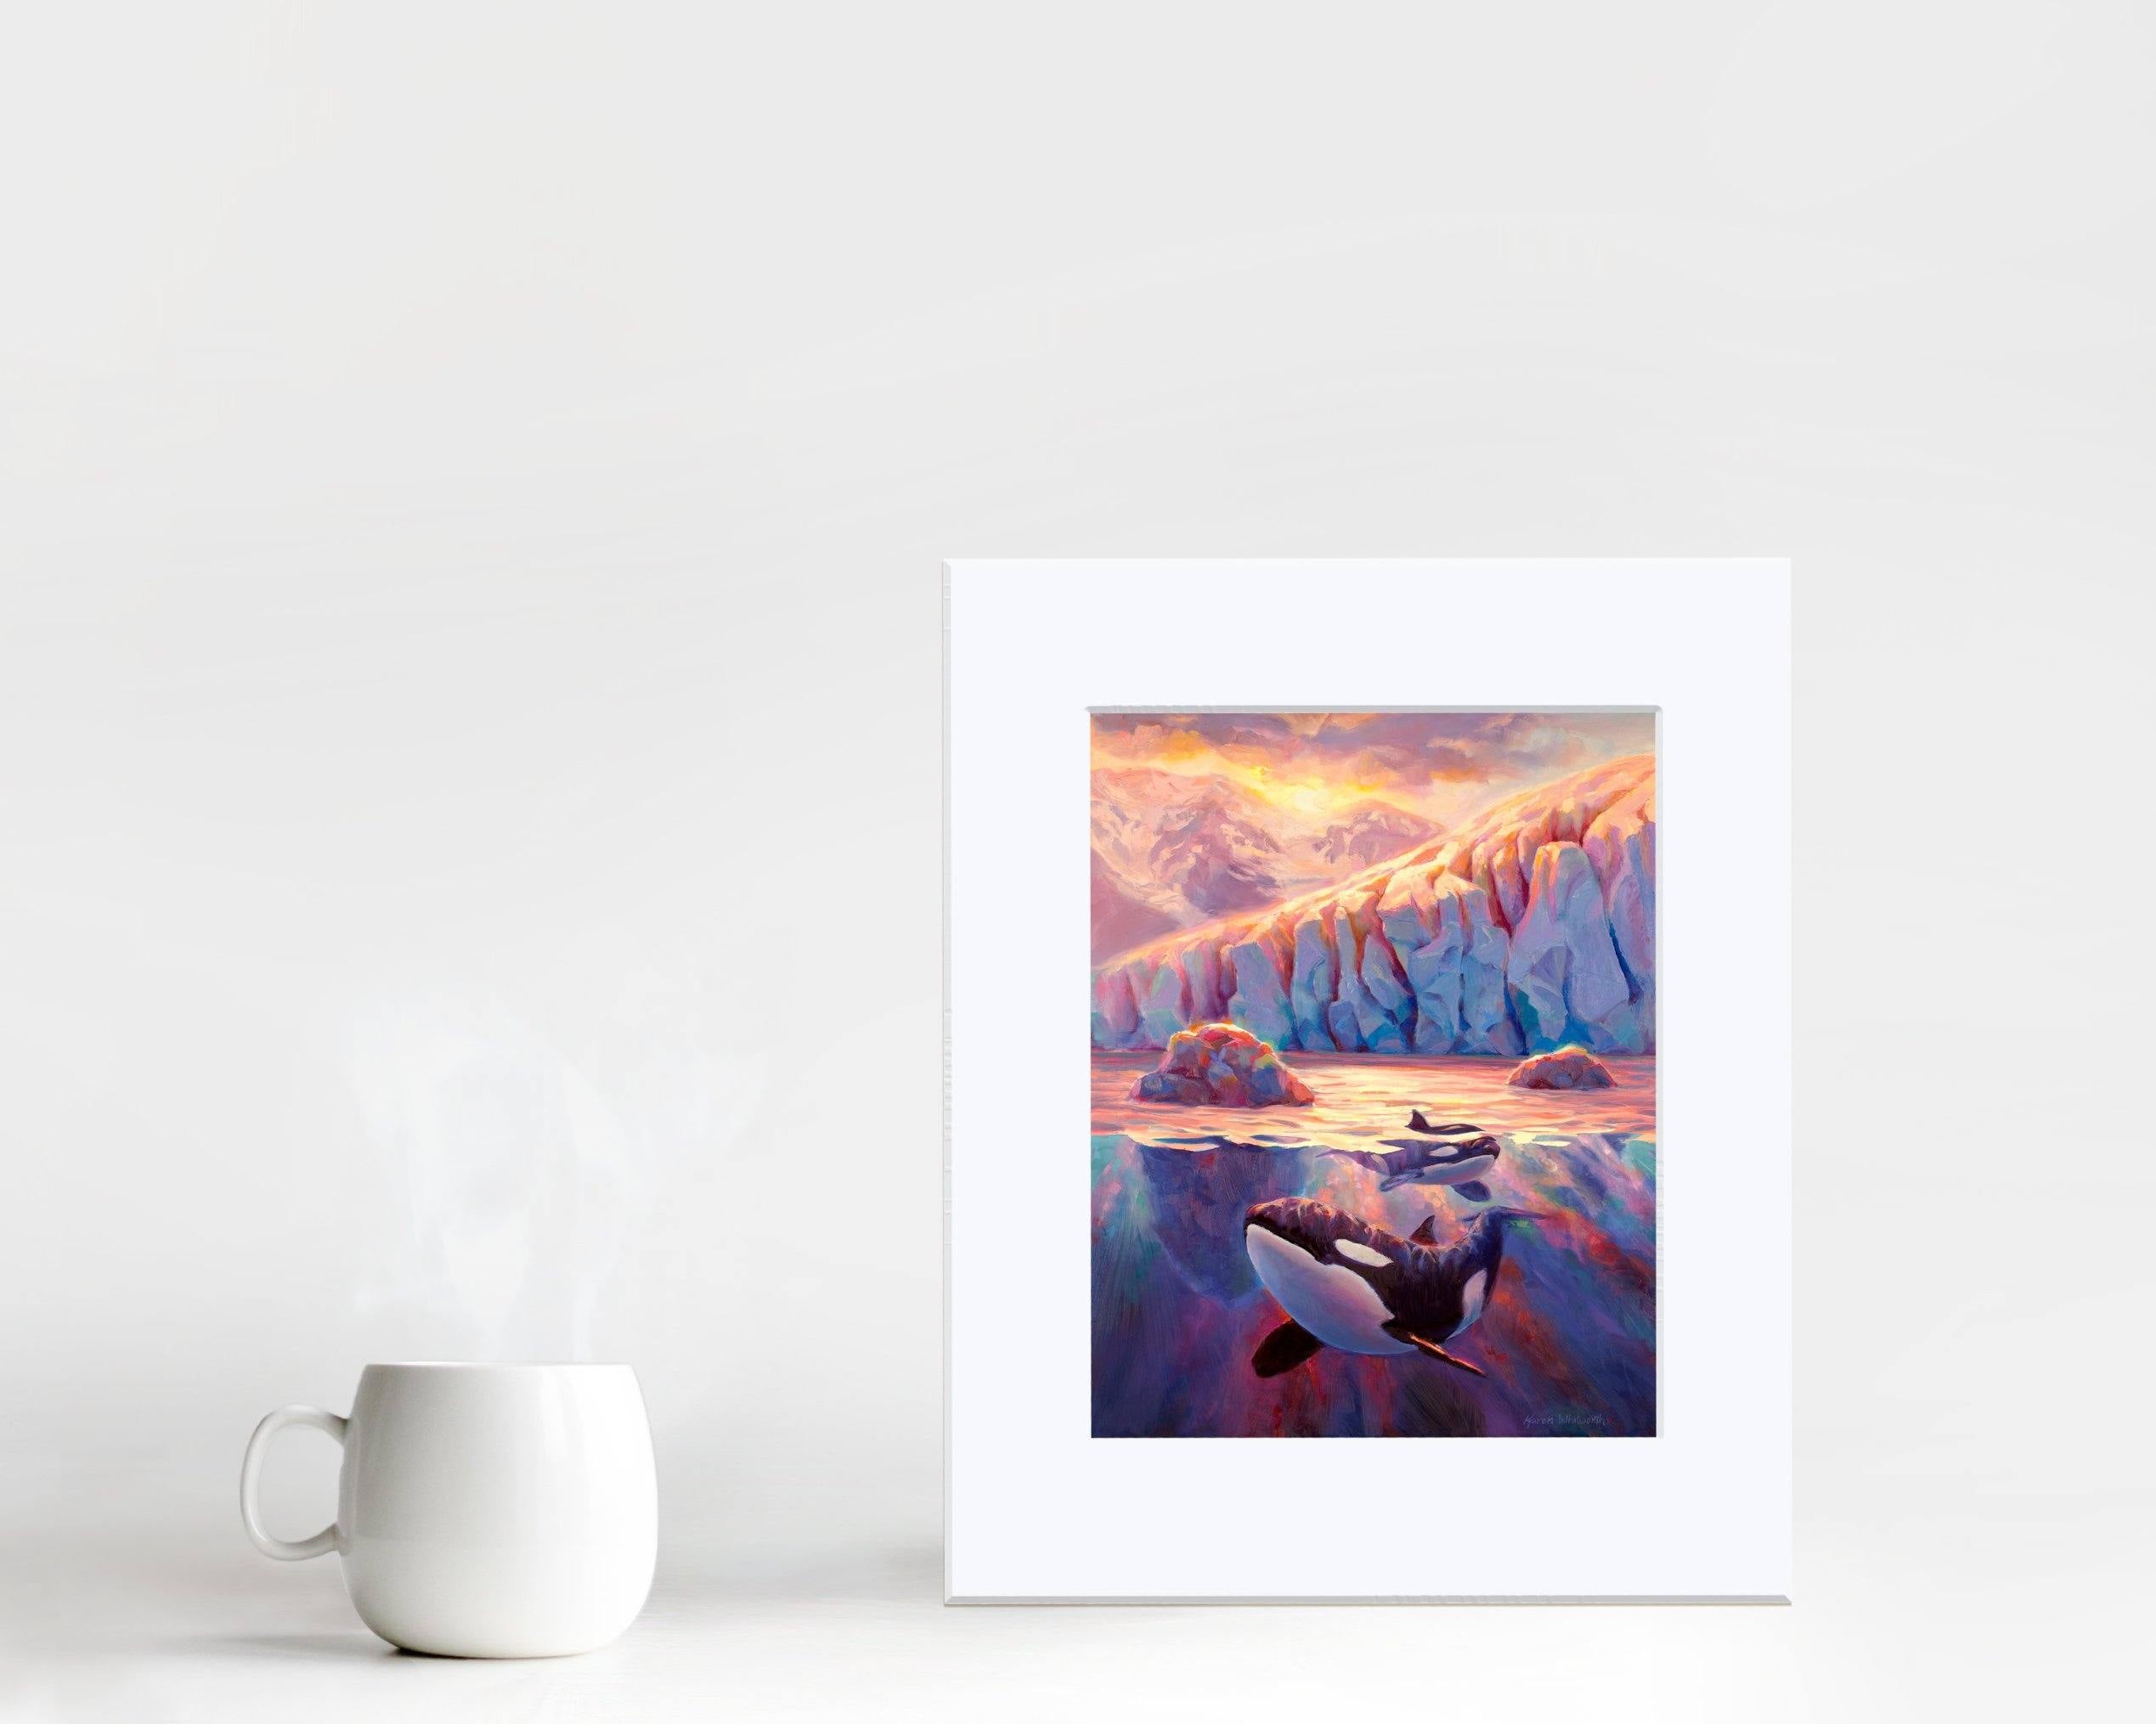 Paper wall art print of Orca whales and Alaskan glacier landscape painting by artist Karen Whitworth